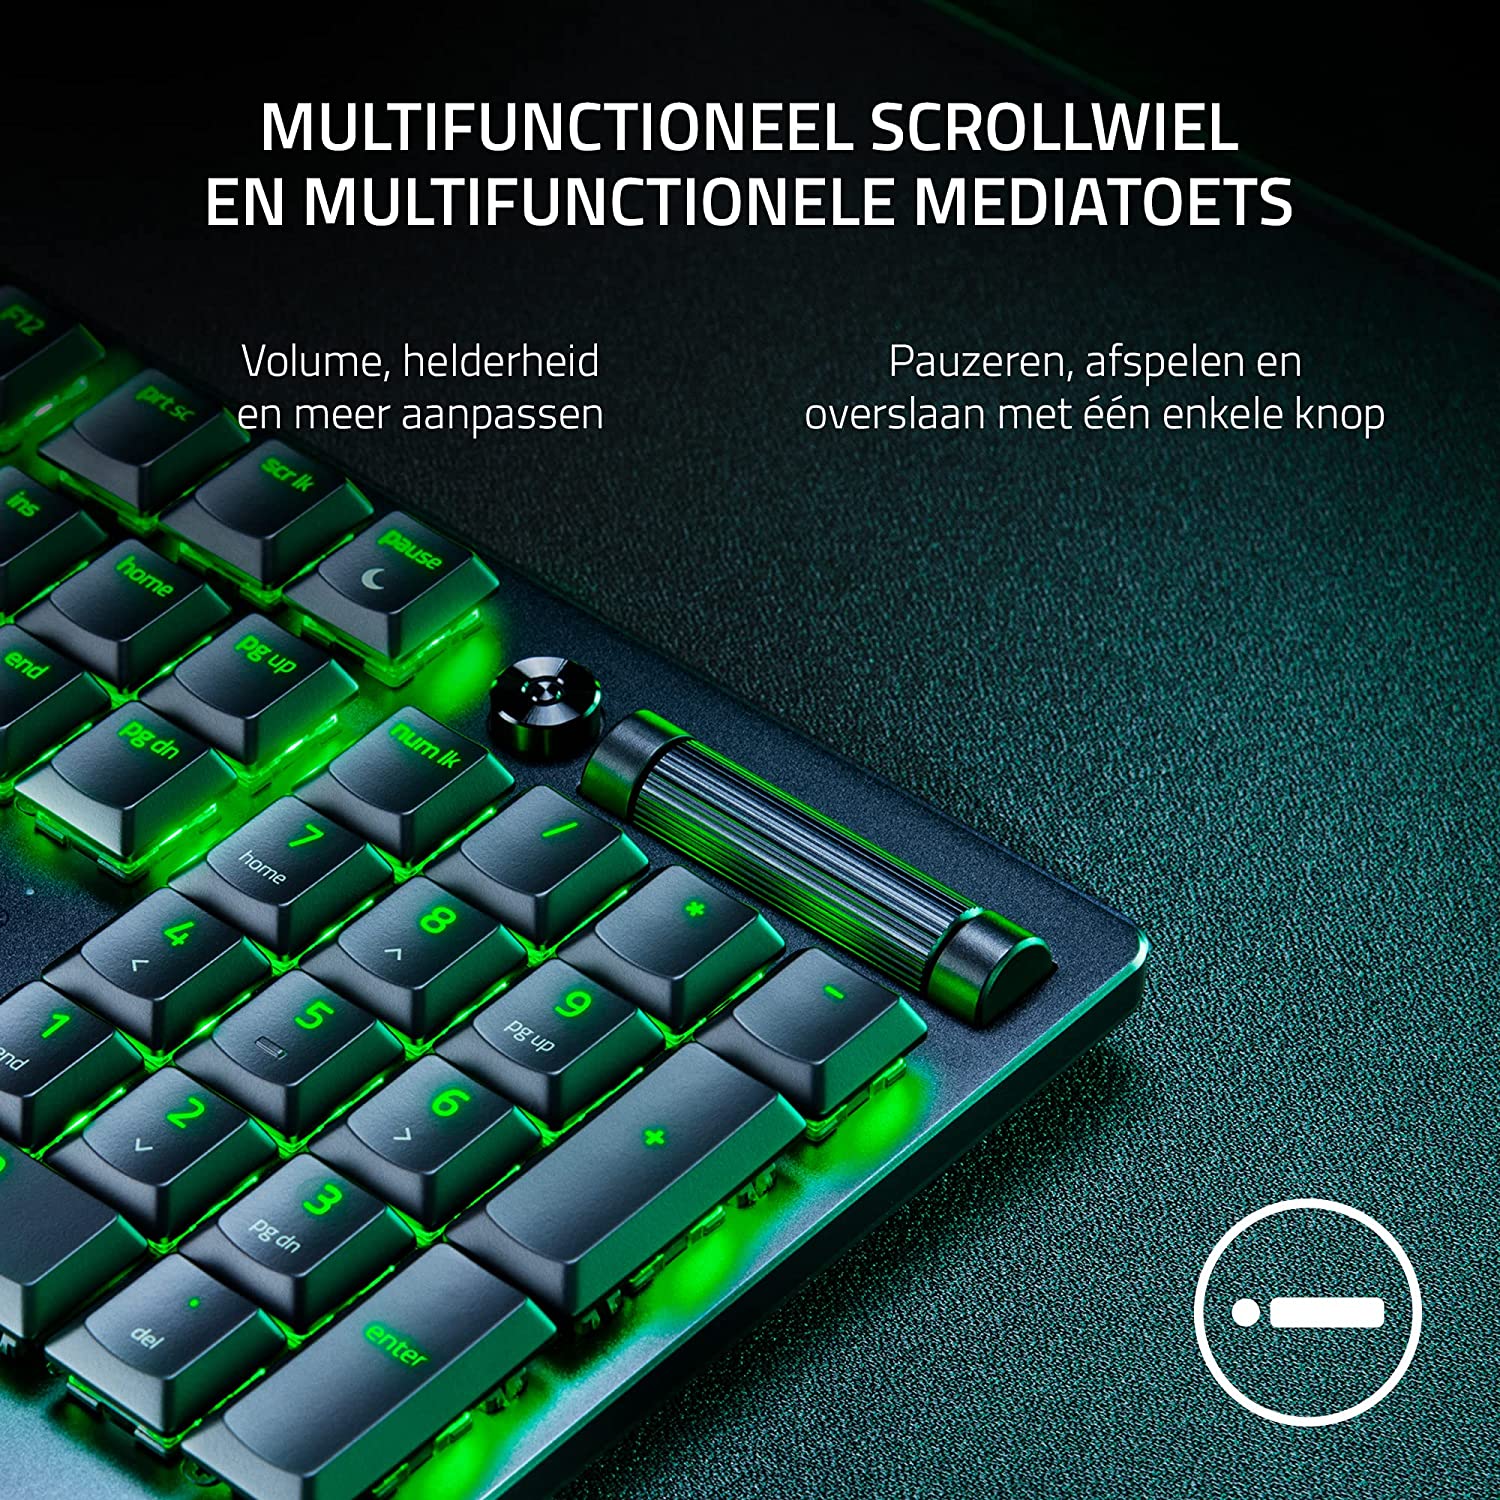 Razer DeathStalker V2 Pro Wireless Gaming Keyboard Low-Profile Optical Switches - Linear Red - HyperSpeed Wireless & Bluetooth Ultra-Durable Coated Keycaps Chroma RGB- Black RZ03-04360100-R3M1-KEYBOARD-RAZER-computerspace